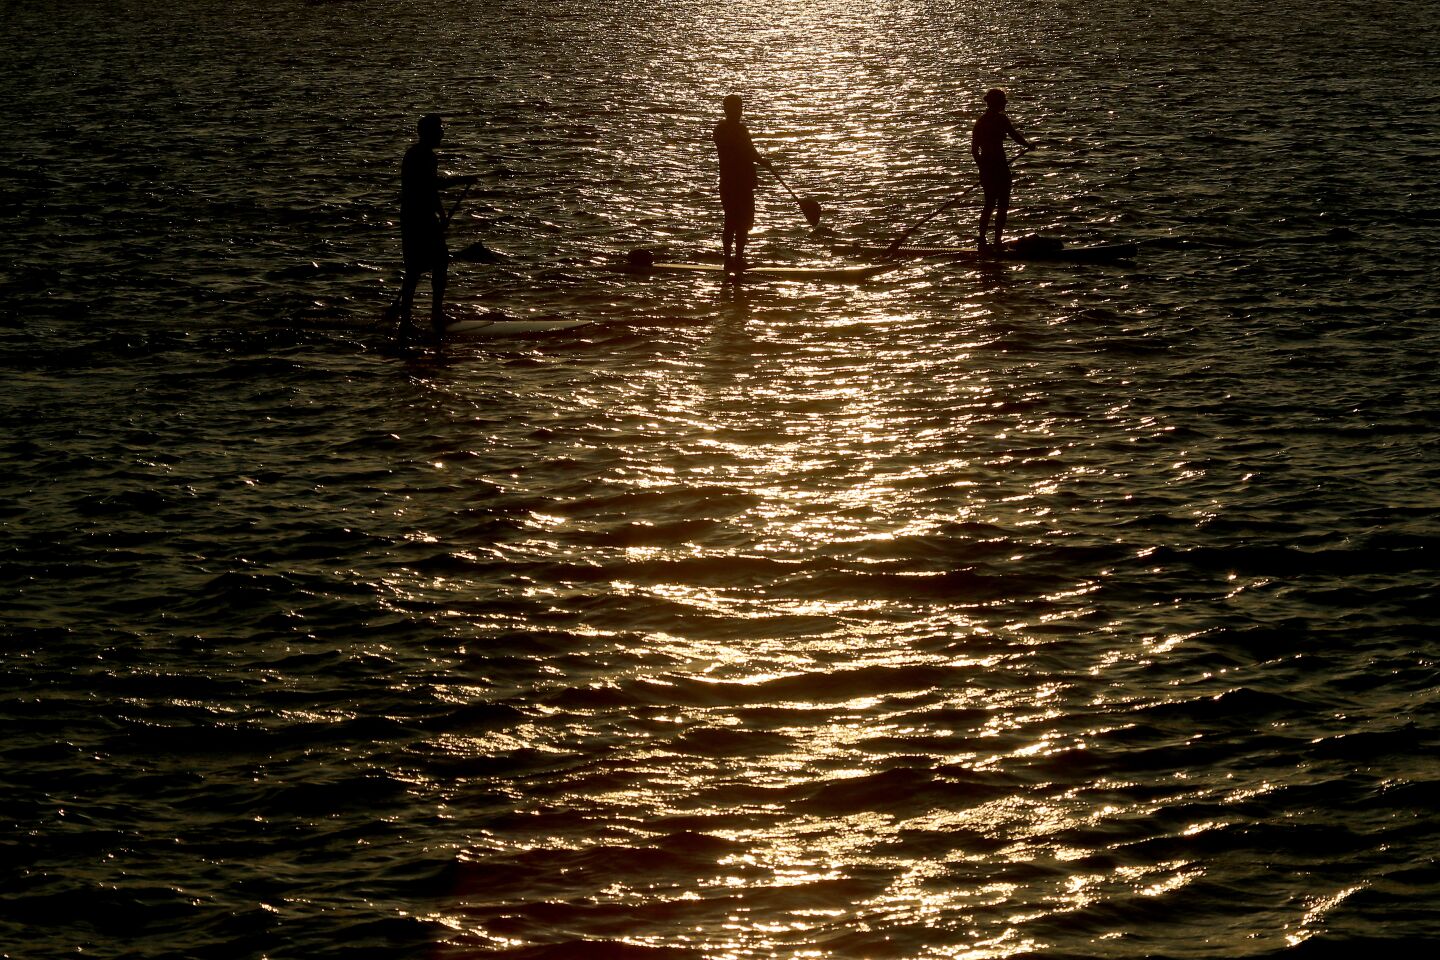 Paddle boarders navigate Alamitos Bay in Long Beach.